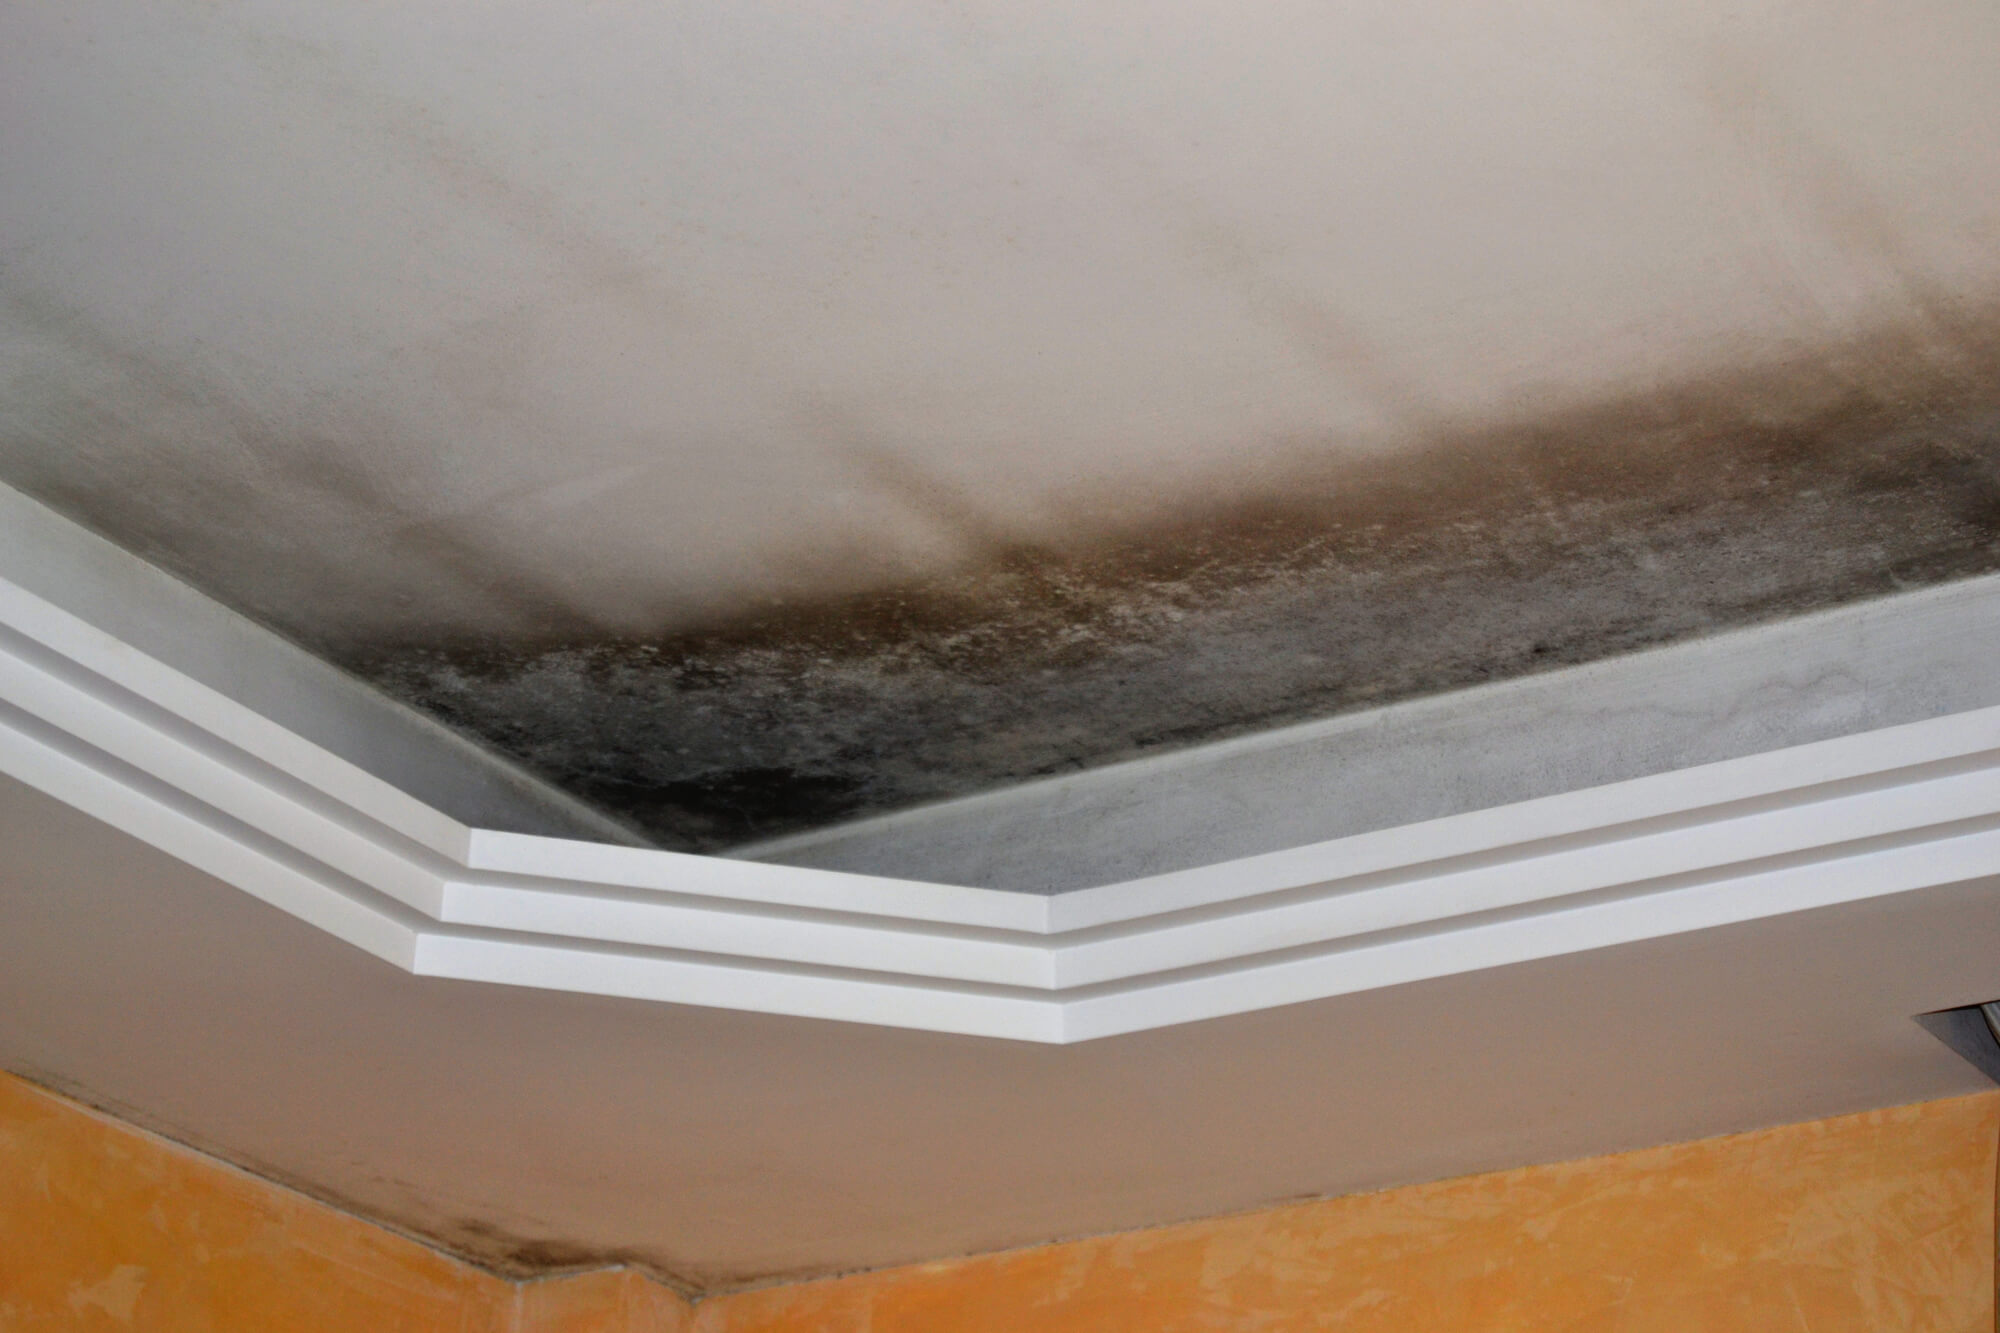 mold on the roof in need of commercial mold removal